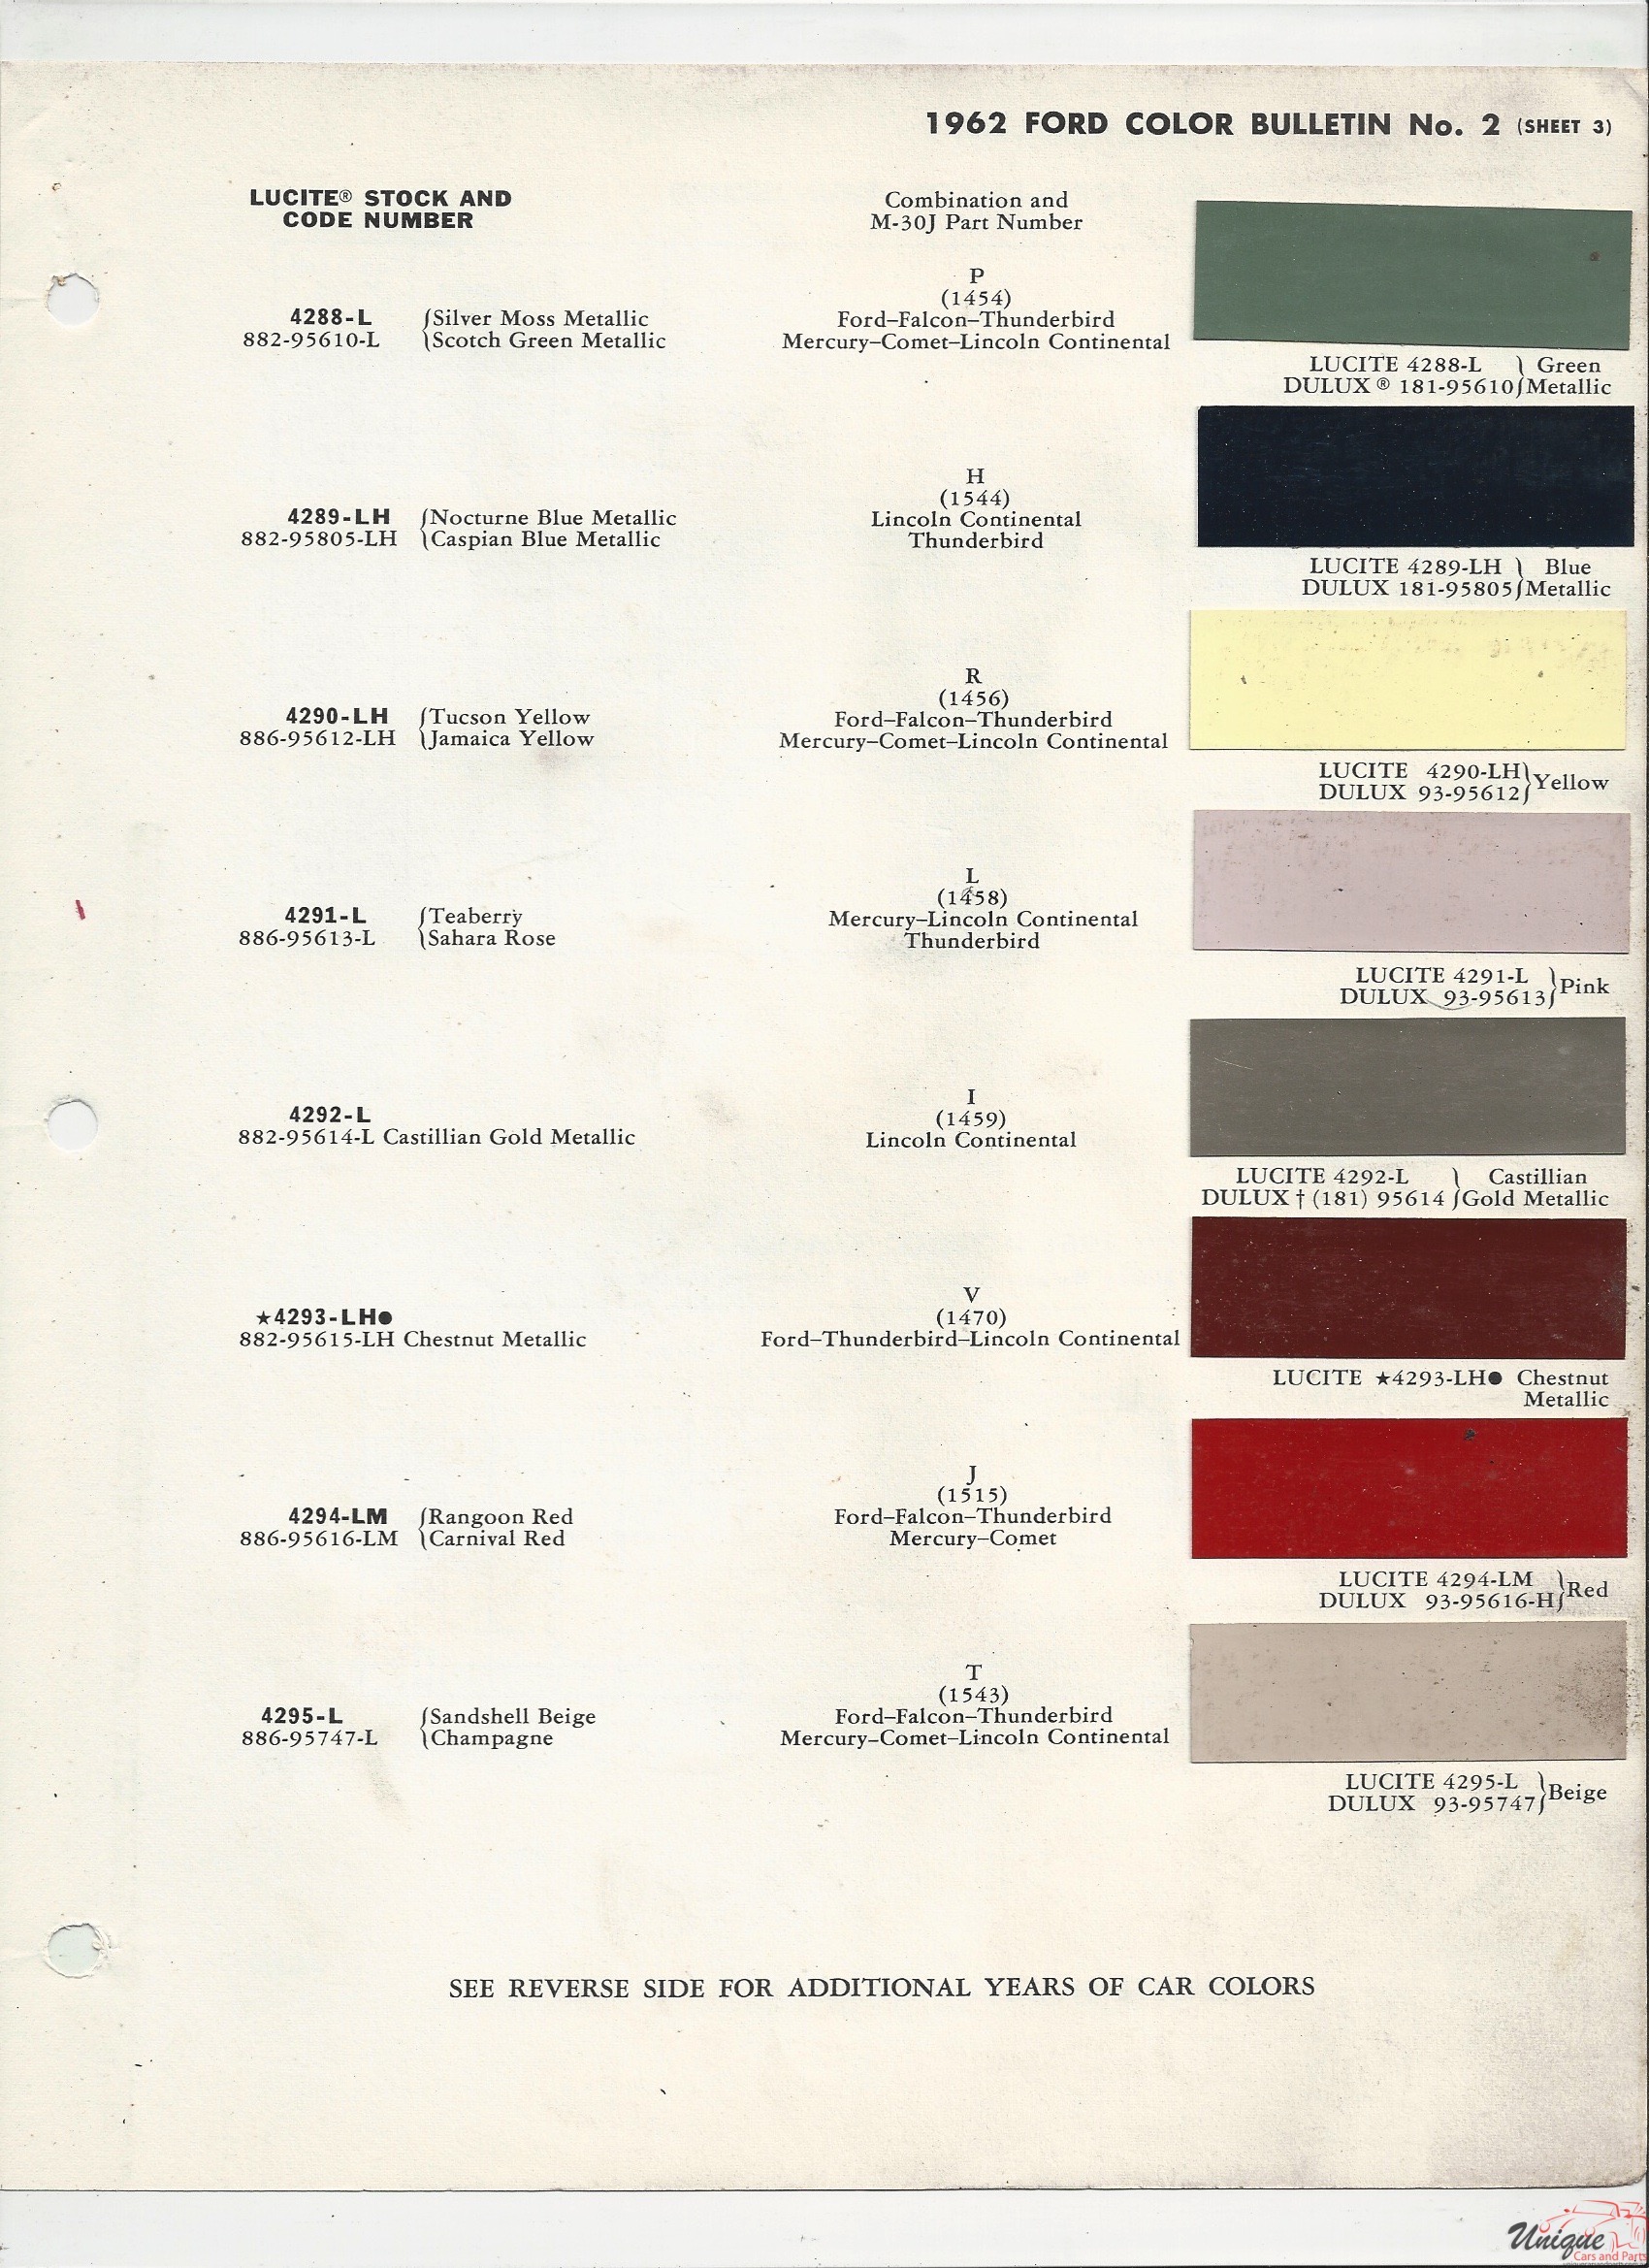 1962 Ford-4 Paint Charts